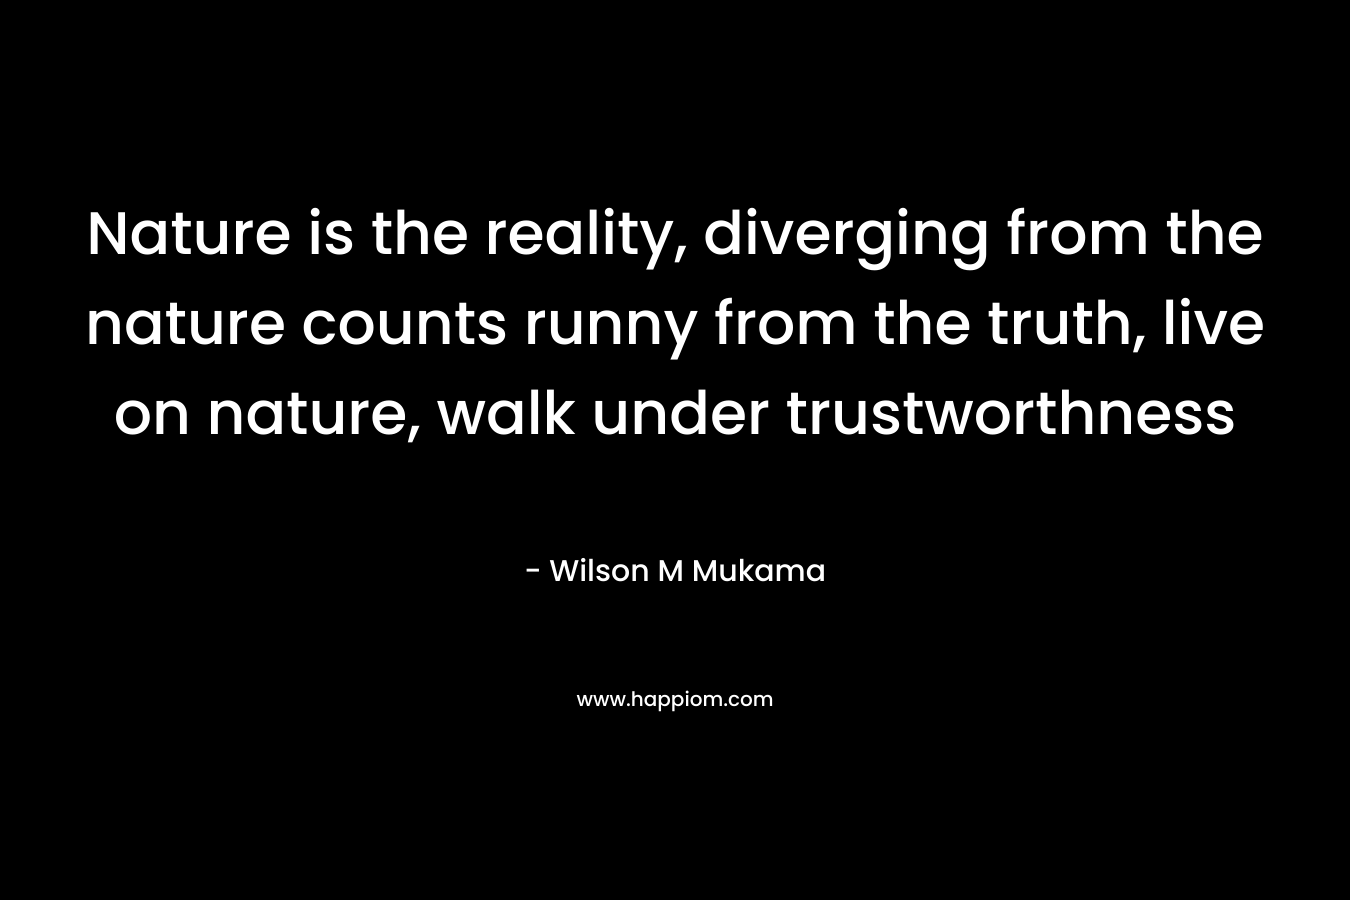 Nature is the reality, diverging from the nature counts runny from the truth, live on nature, walk under trustworthness – Wilson M Mukama